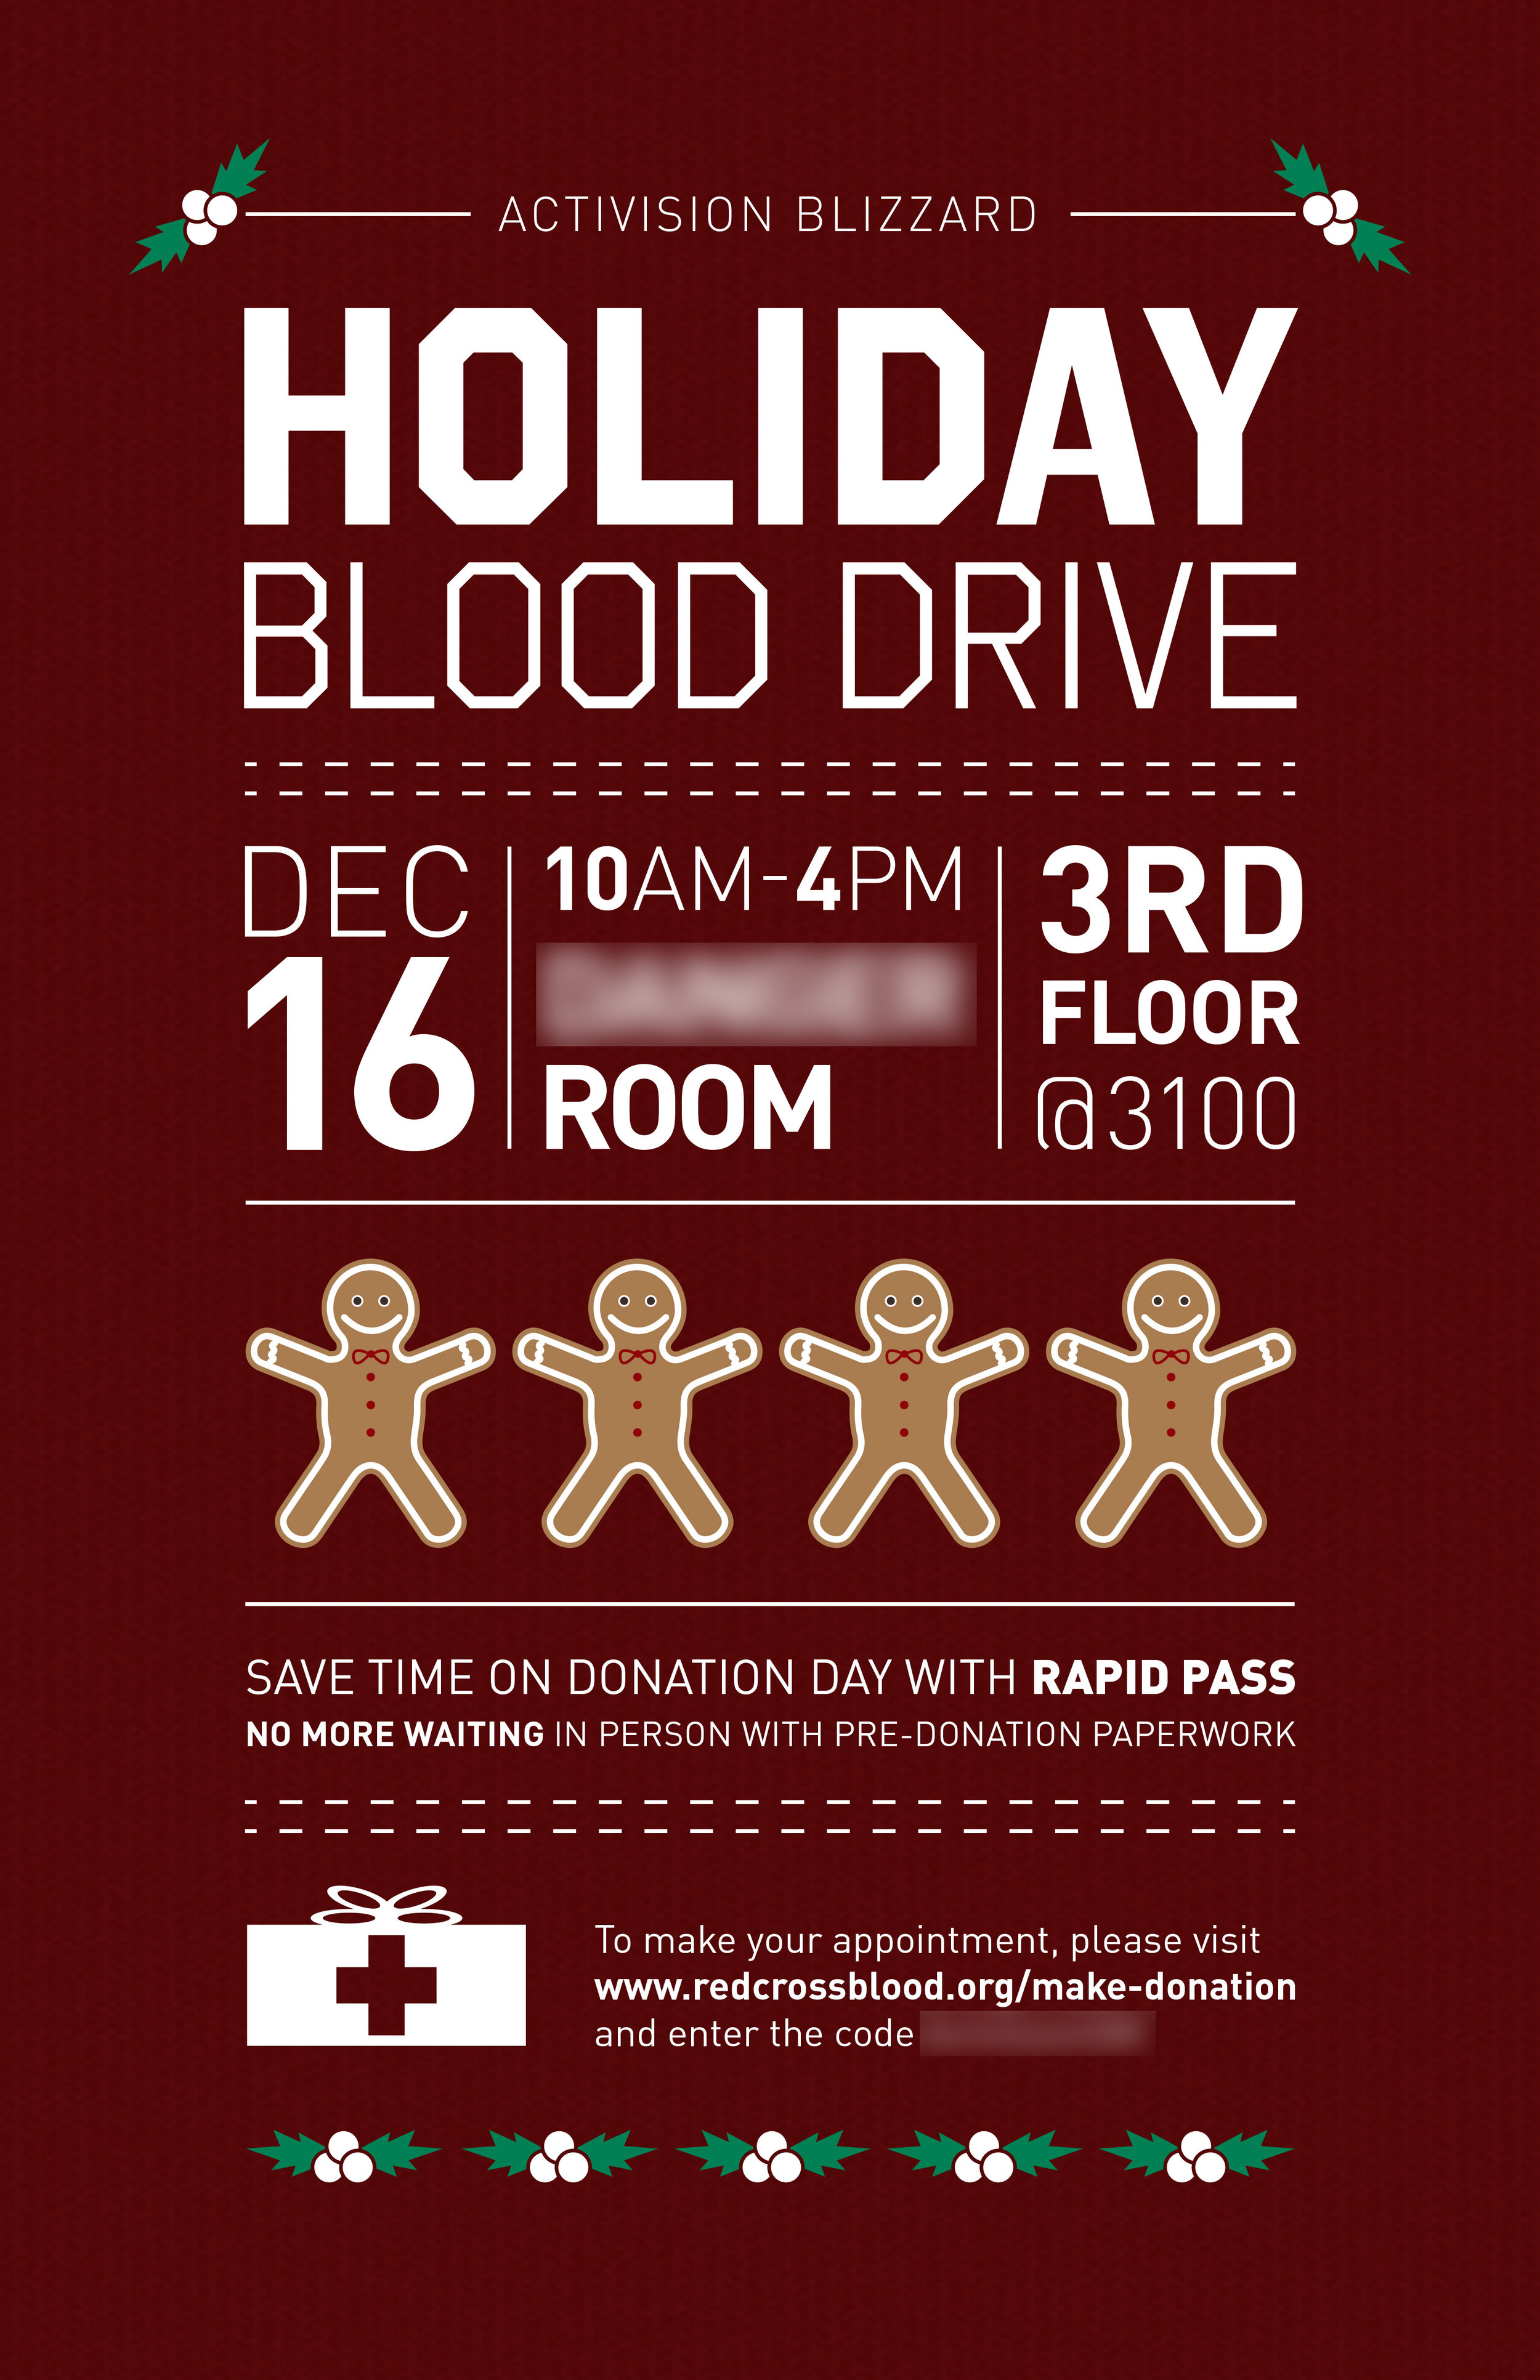 Holiday_Blood_Drive_Posters_1.jpg